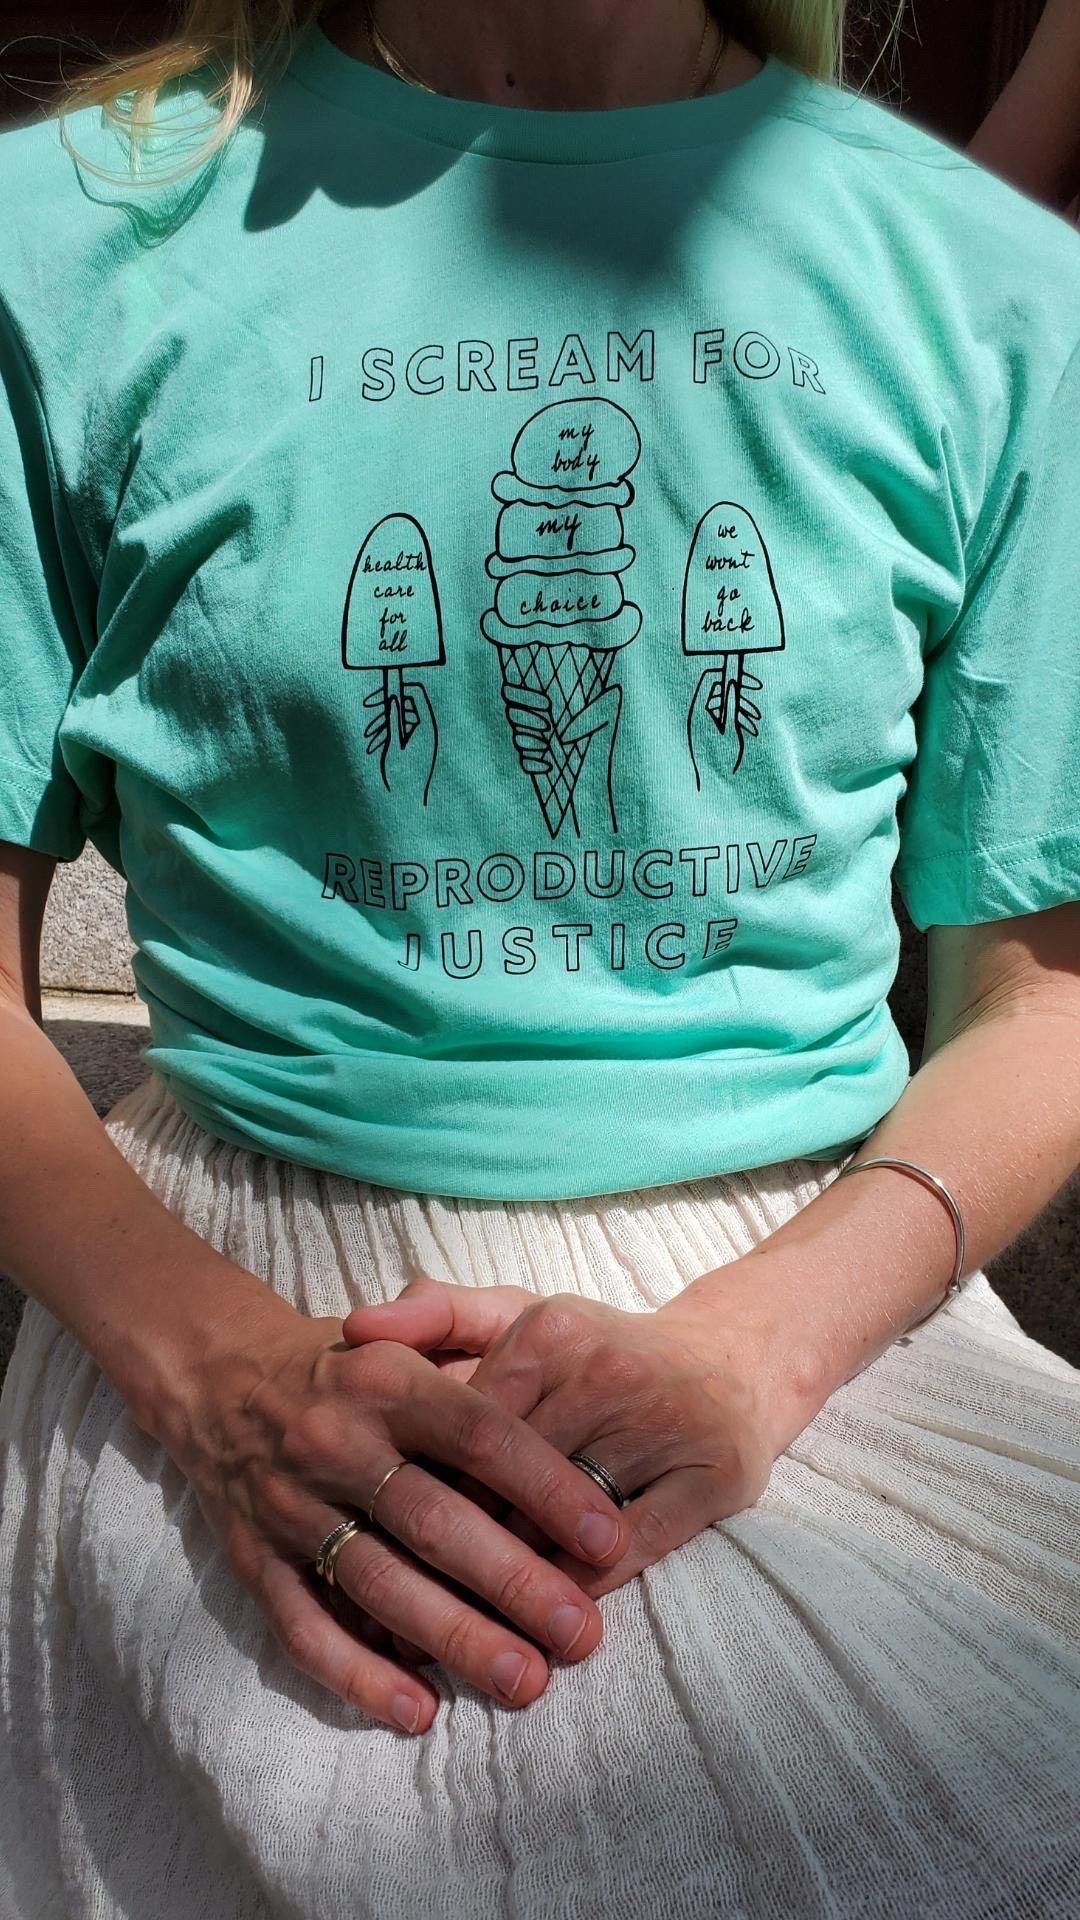 A woman wears a mint green tee that reads "I Scream for Reproductive Justice" with a white skirt